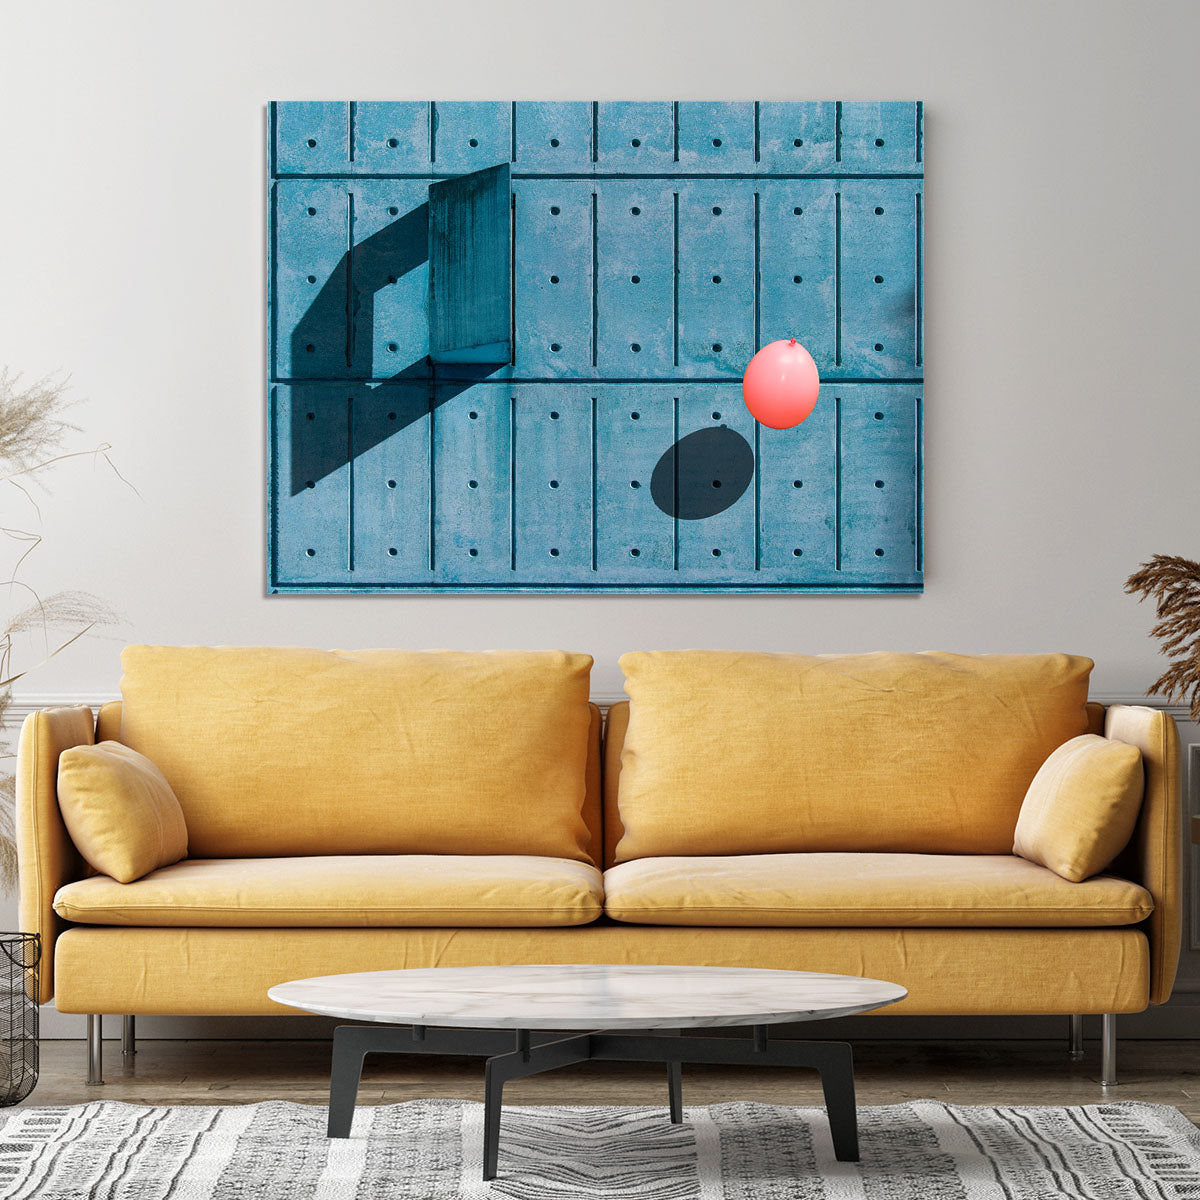 Another balloon Canvas Print or Poster - 1x - 4